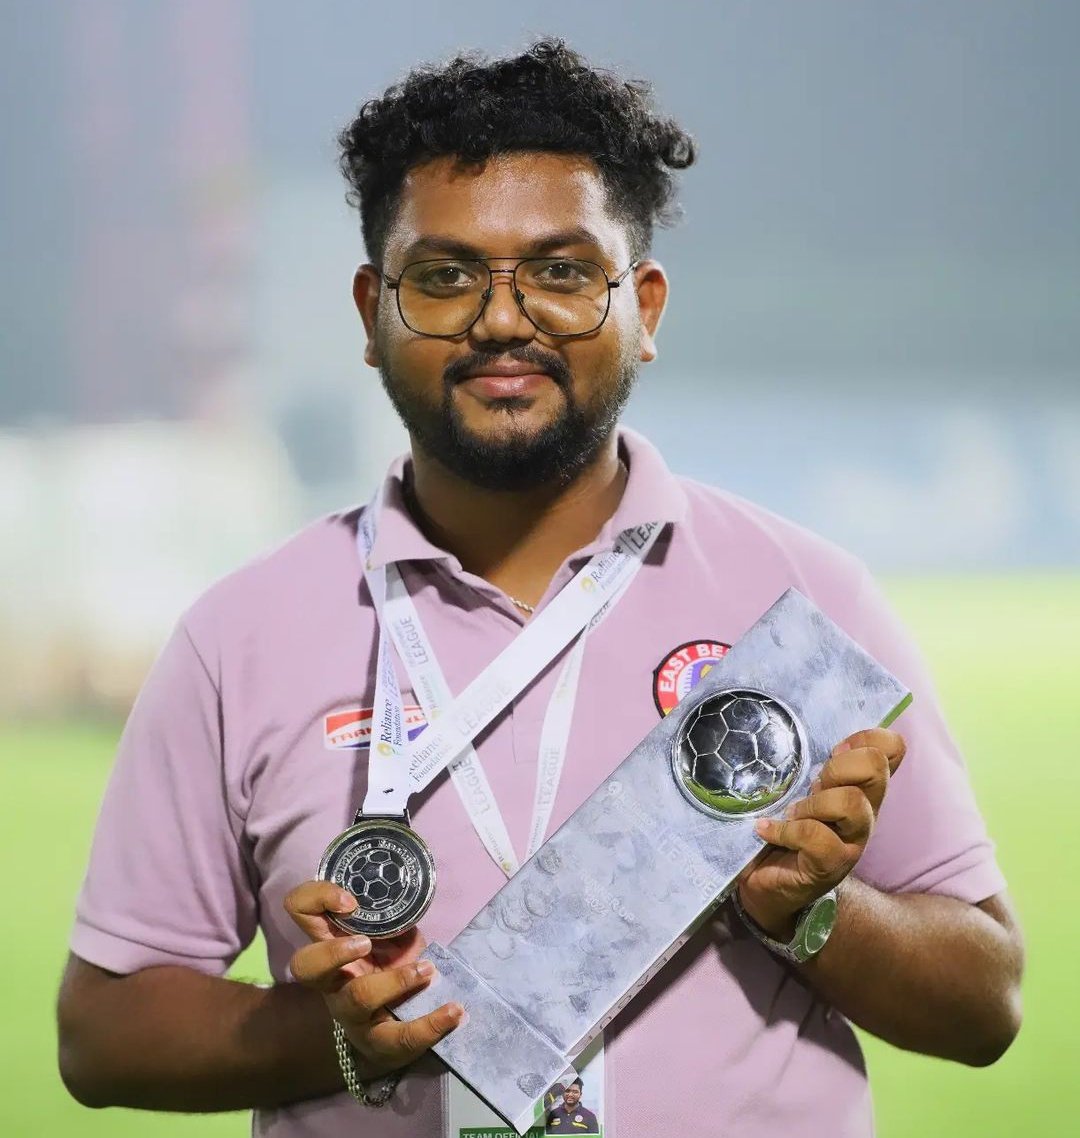 Aritra Dutta, Reserve Team Manager : “We didn't lose. We got second. That's still winning. How could I be unhappy with second place? There are million people who would love to be in my position. Looking forward to a better result next season.”

#JoyEastBengal #EastBengalFC